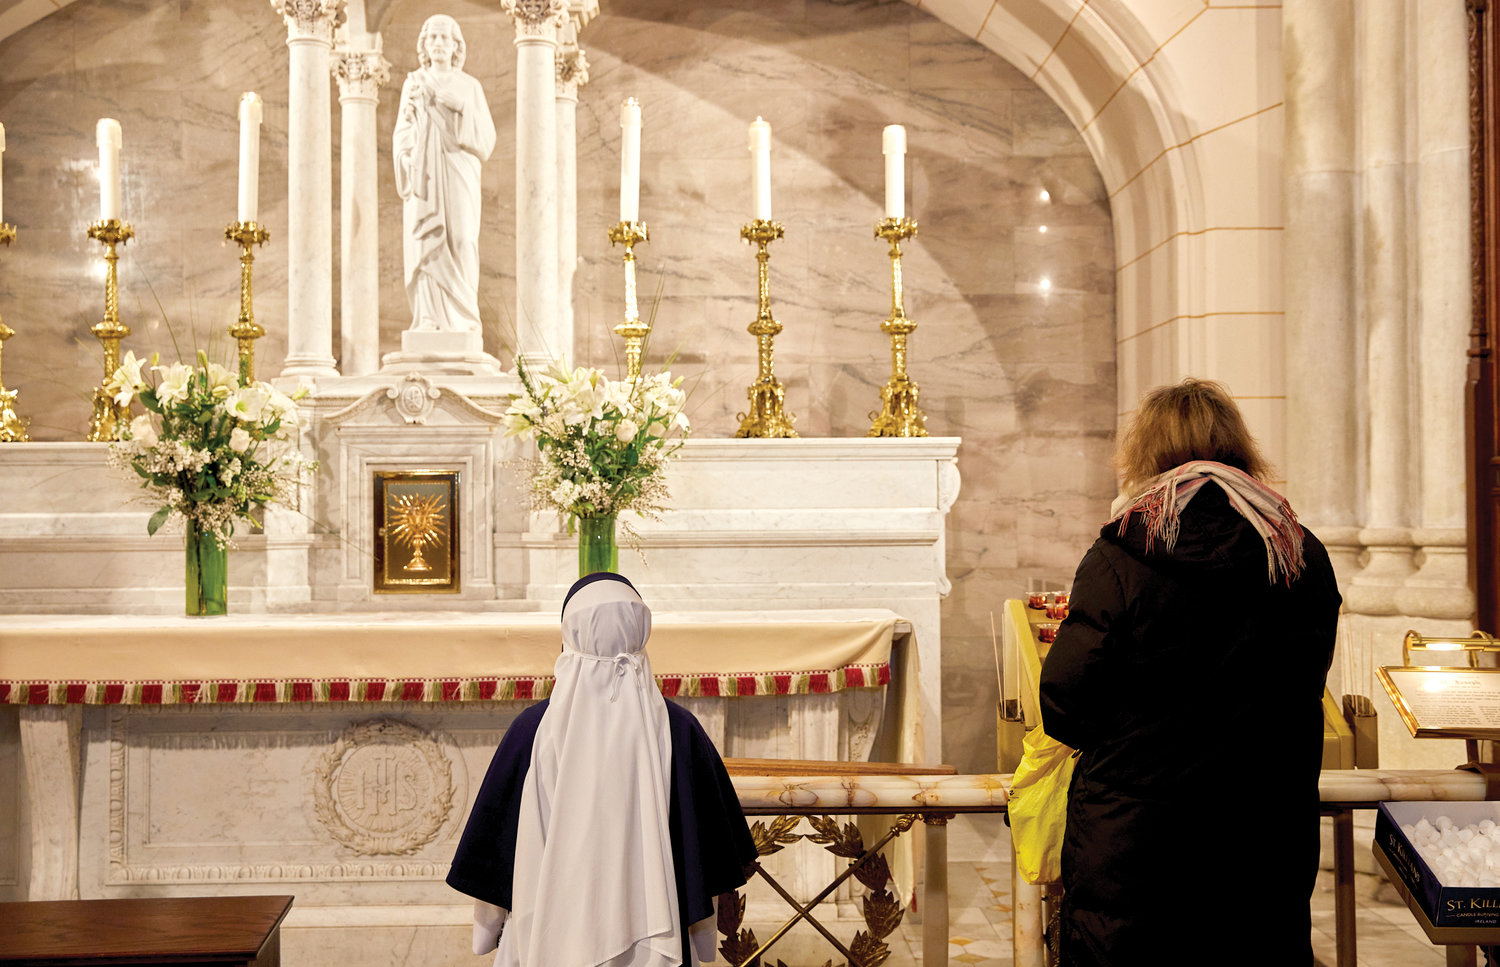 A Sister of Life kneels before the statue of St. Joseph that graces the side altar of the saint at St. Patrick’s Cathedral March 19. Cardinal Dolan had just consecrated the Archdiocese to St. Joseph following the 7 a.m. Mass he offered at the cathedral’s main altar.